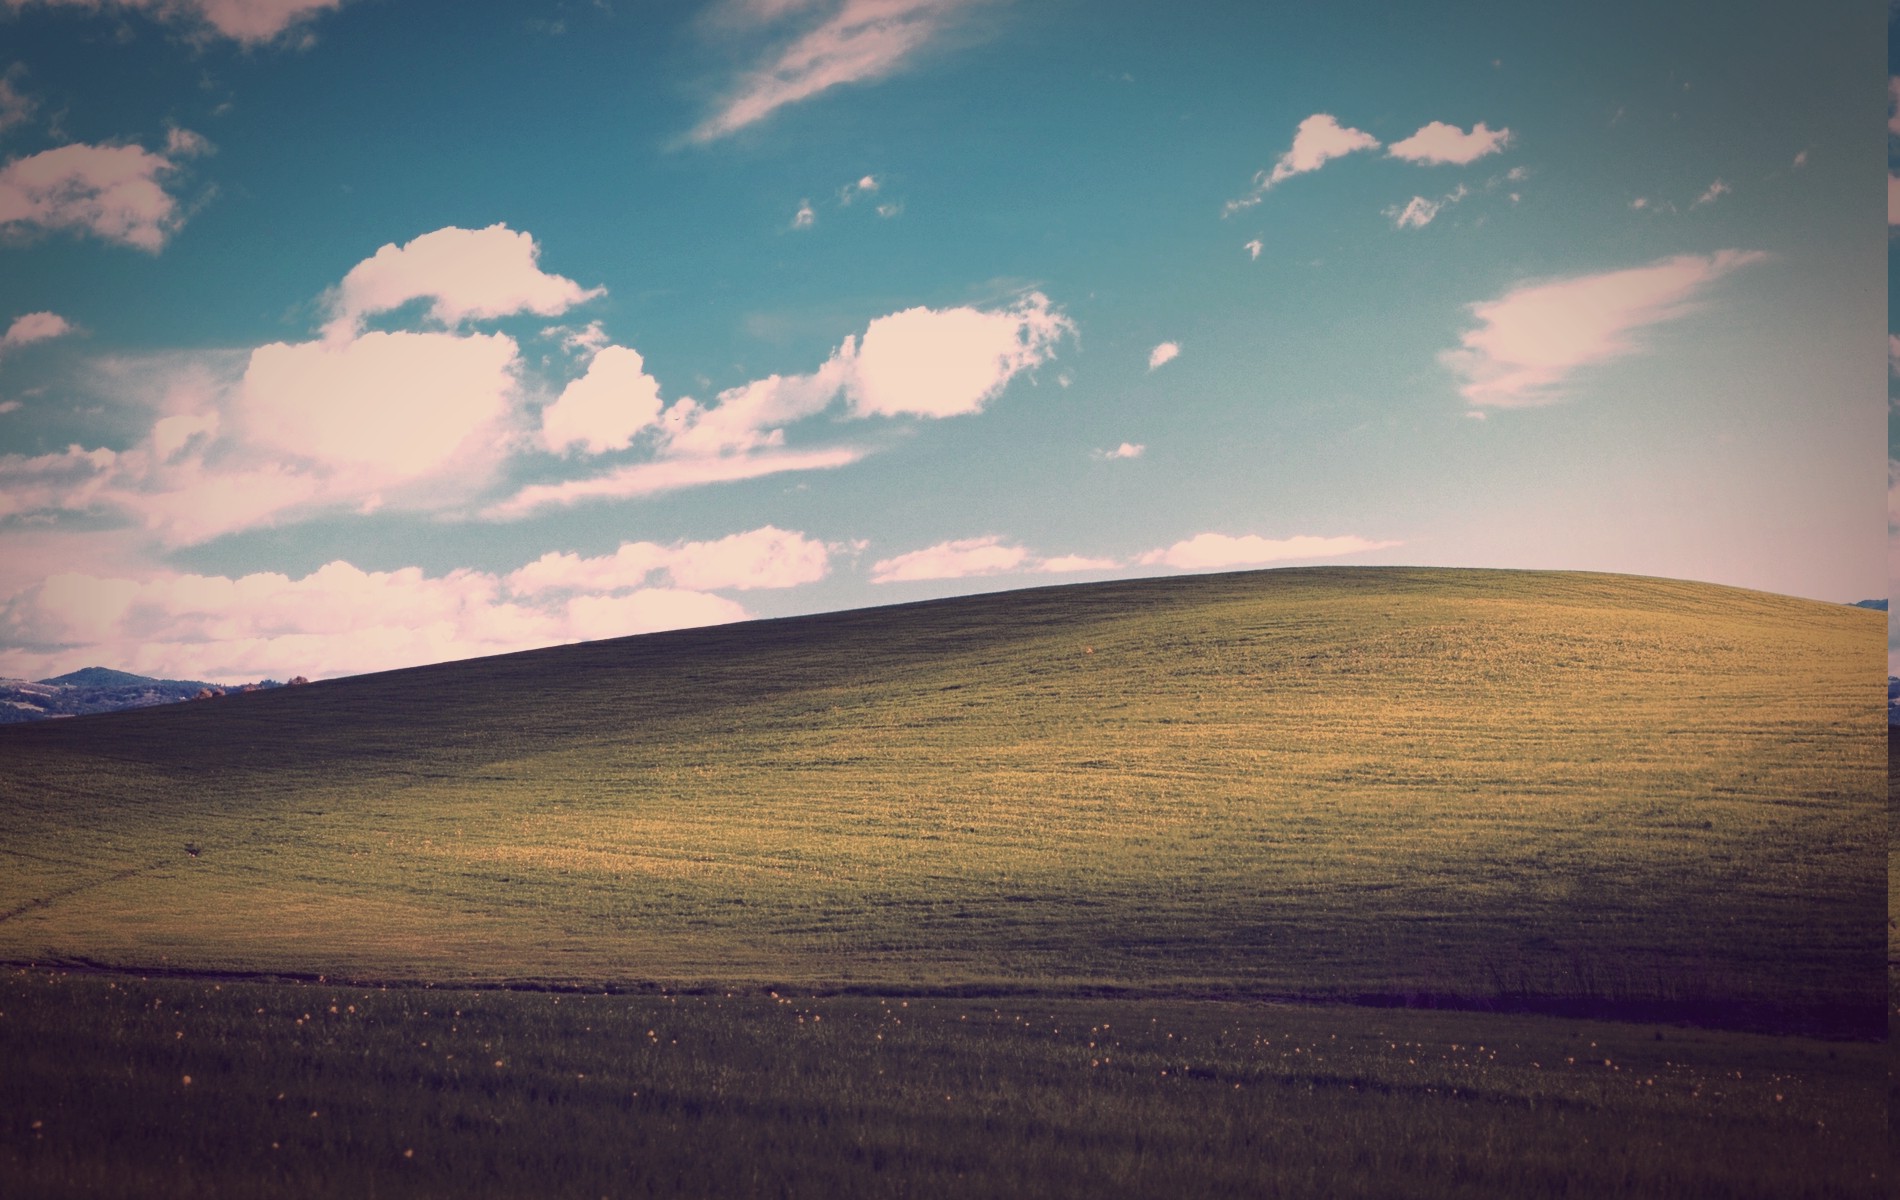 windows xp background right now 1920x1080